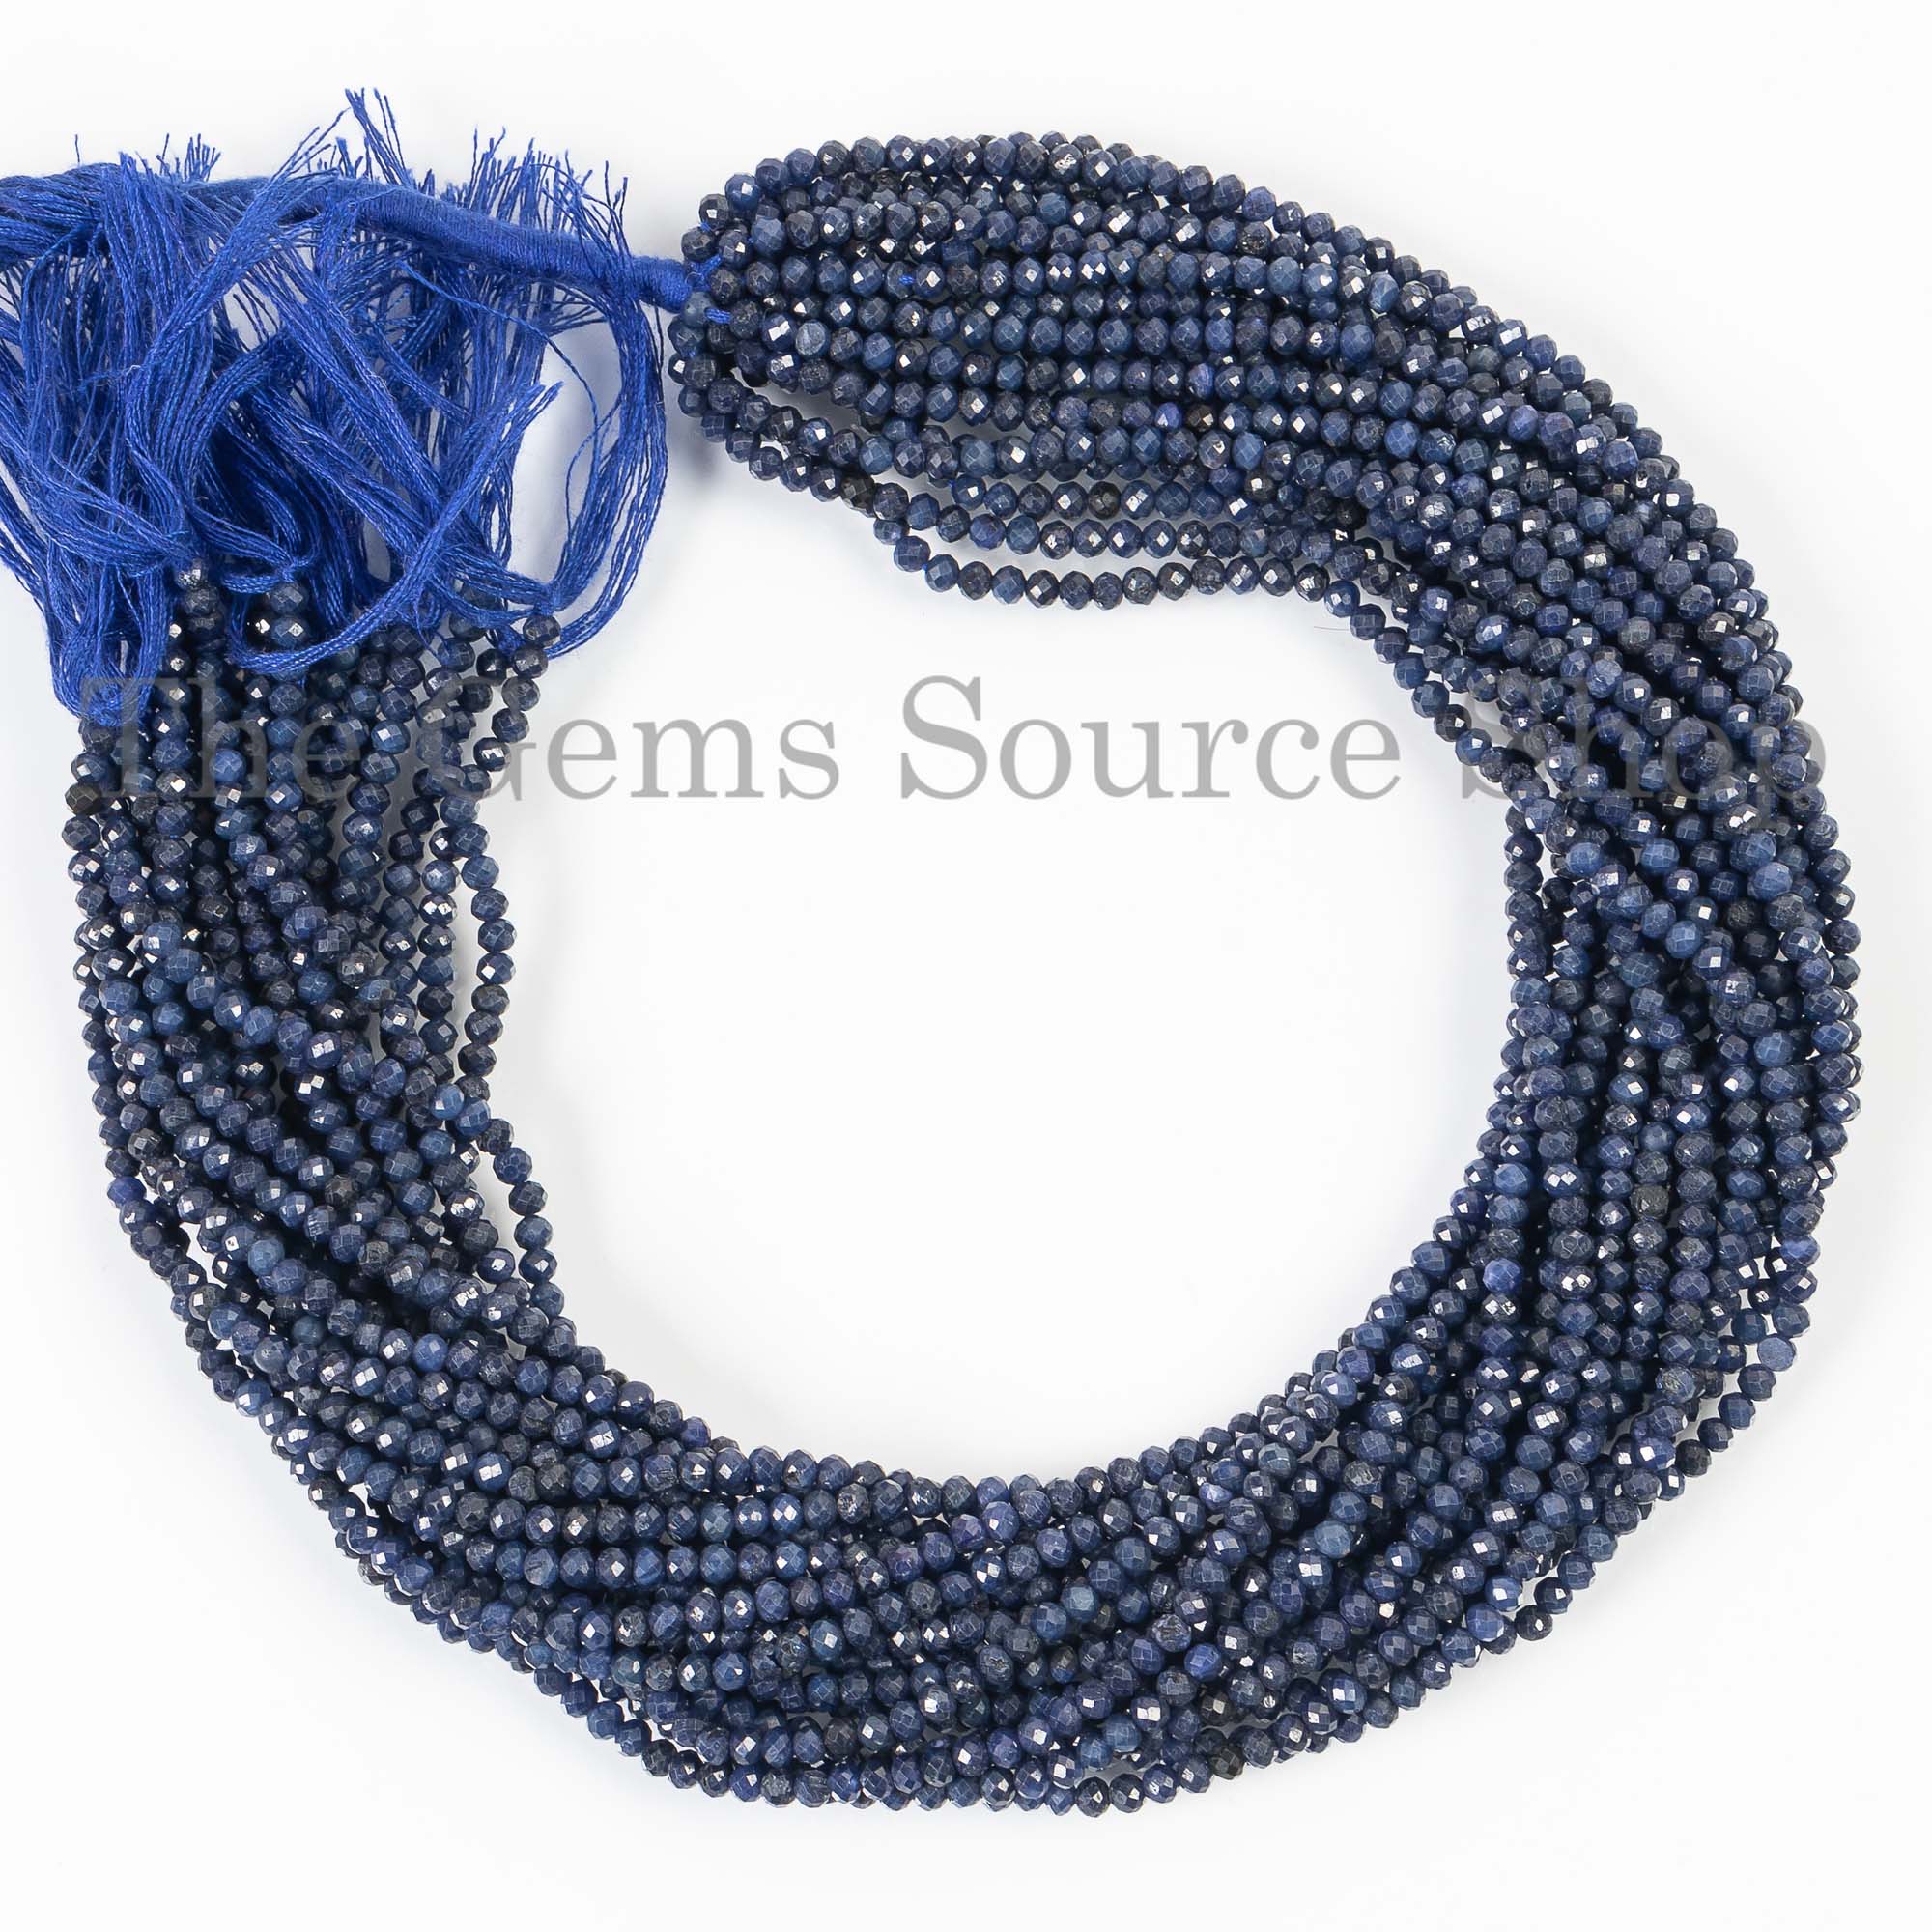 3-3.5mm Blue Sapphire Faceted Rondelle Beads, Sapphire Gemstone Beads, Sapphire Rondelle Beads, Jewelry Beads, Sapphire Beads